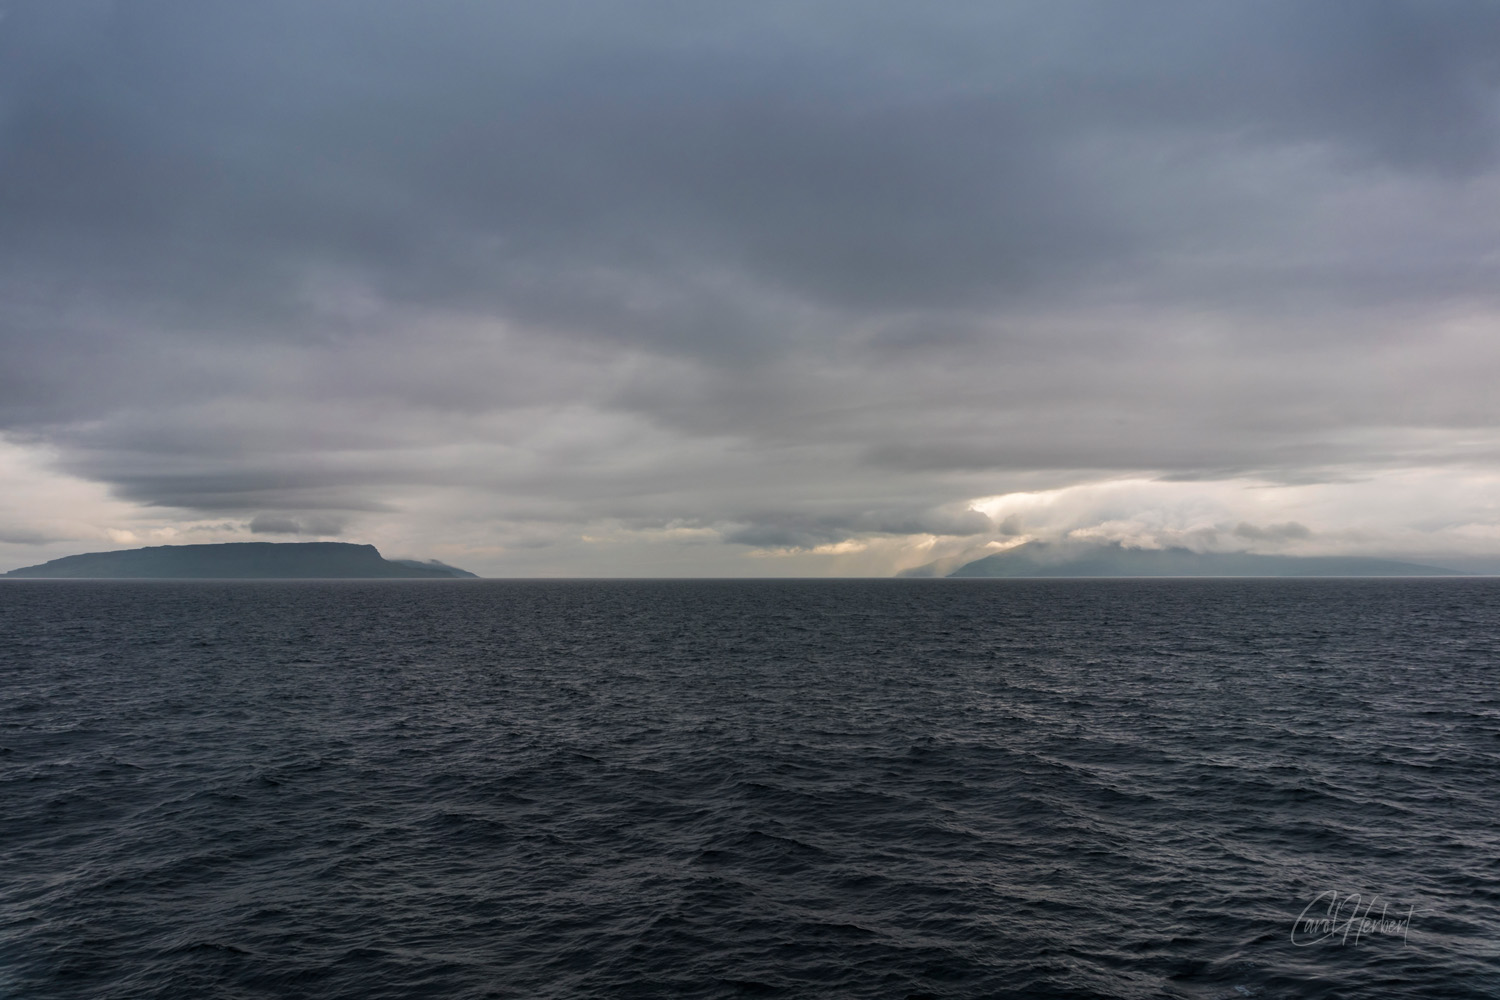 Photograph of Eigg and Rum